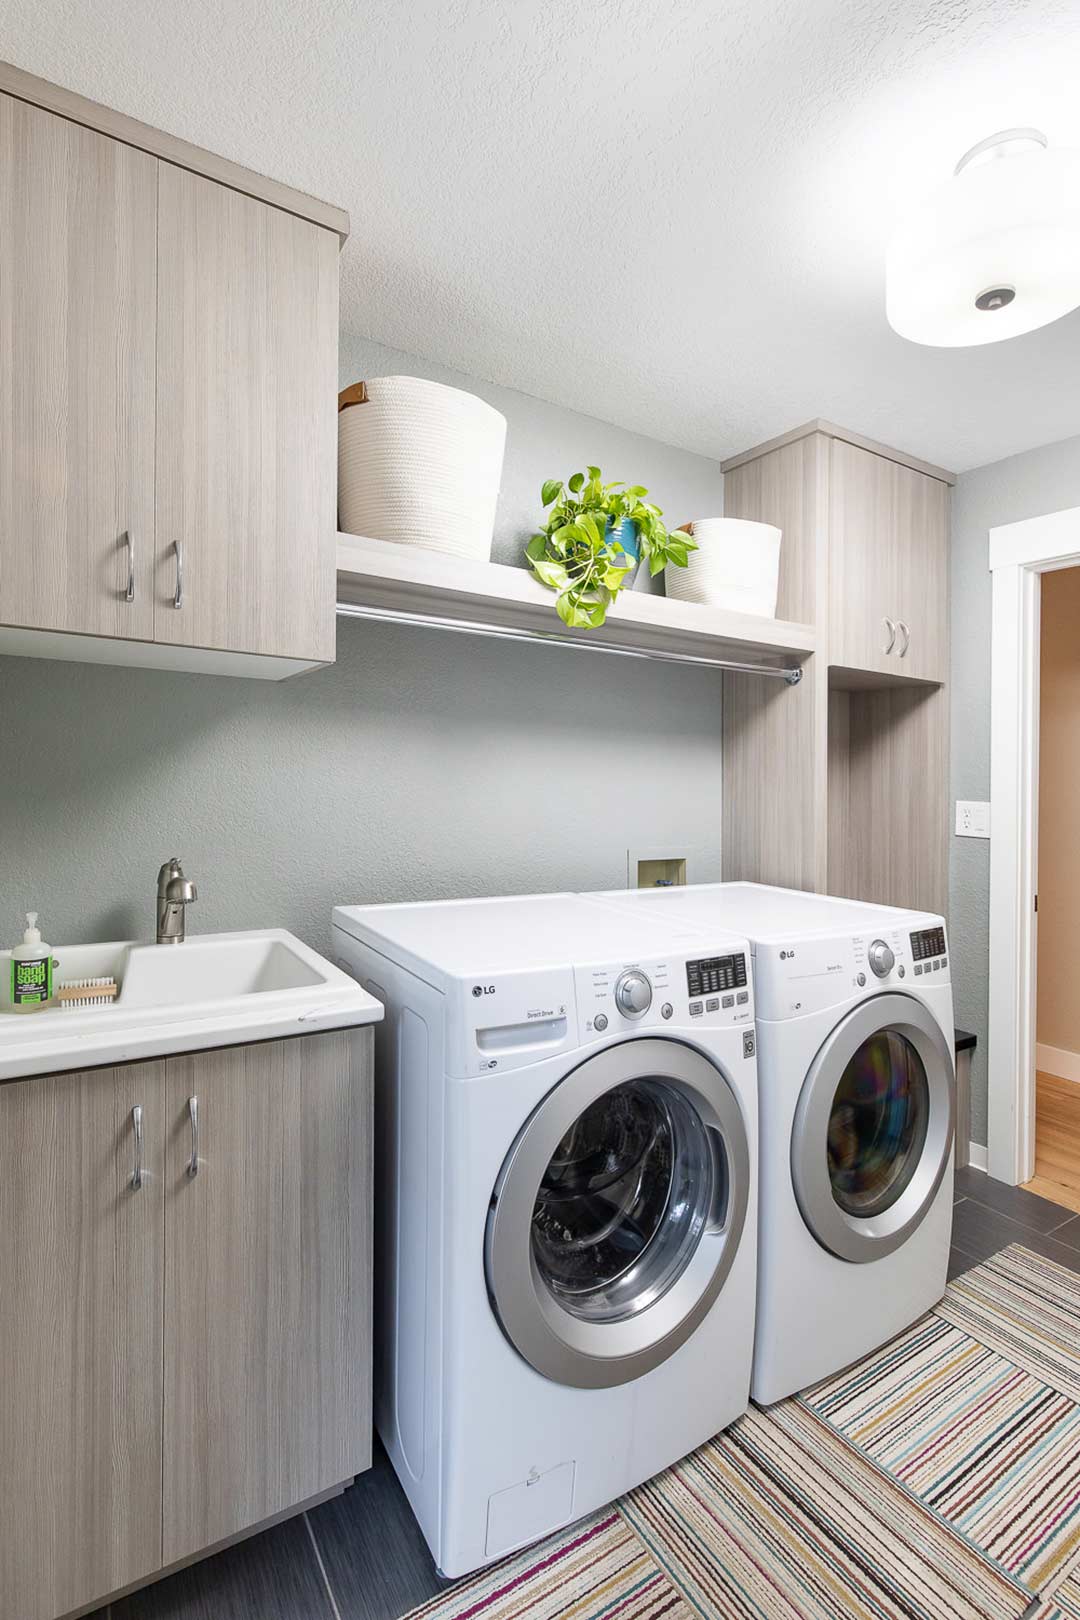 Laundry renovation  showing custom built in cabinets and modern open shelving